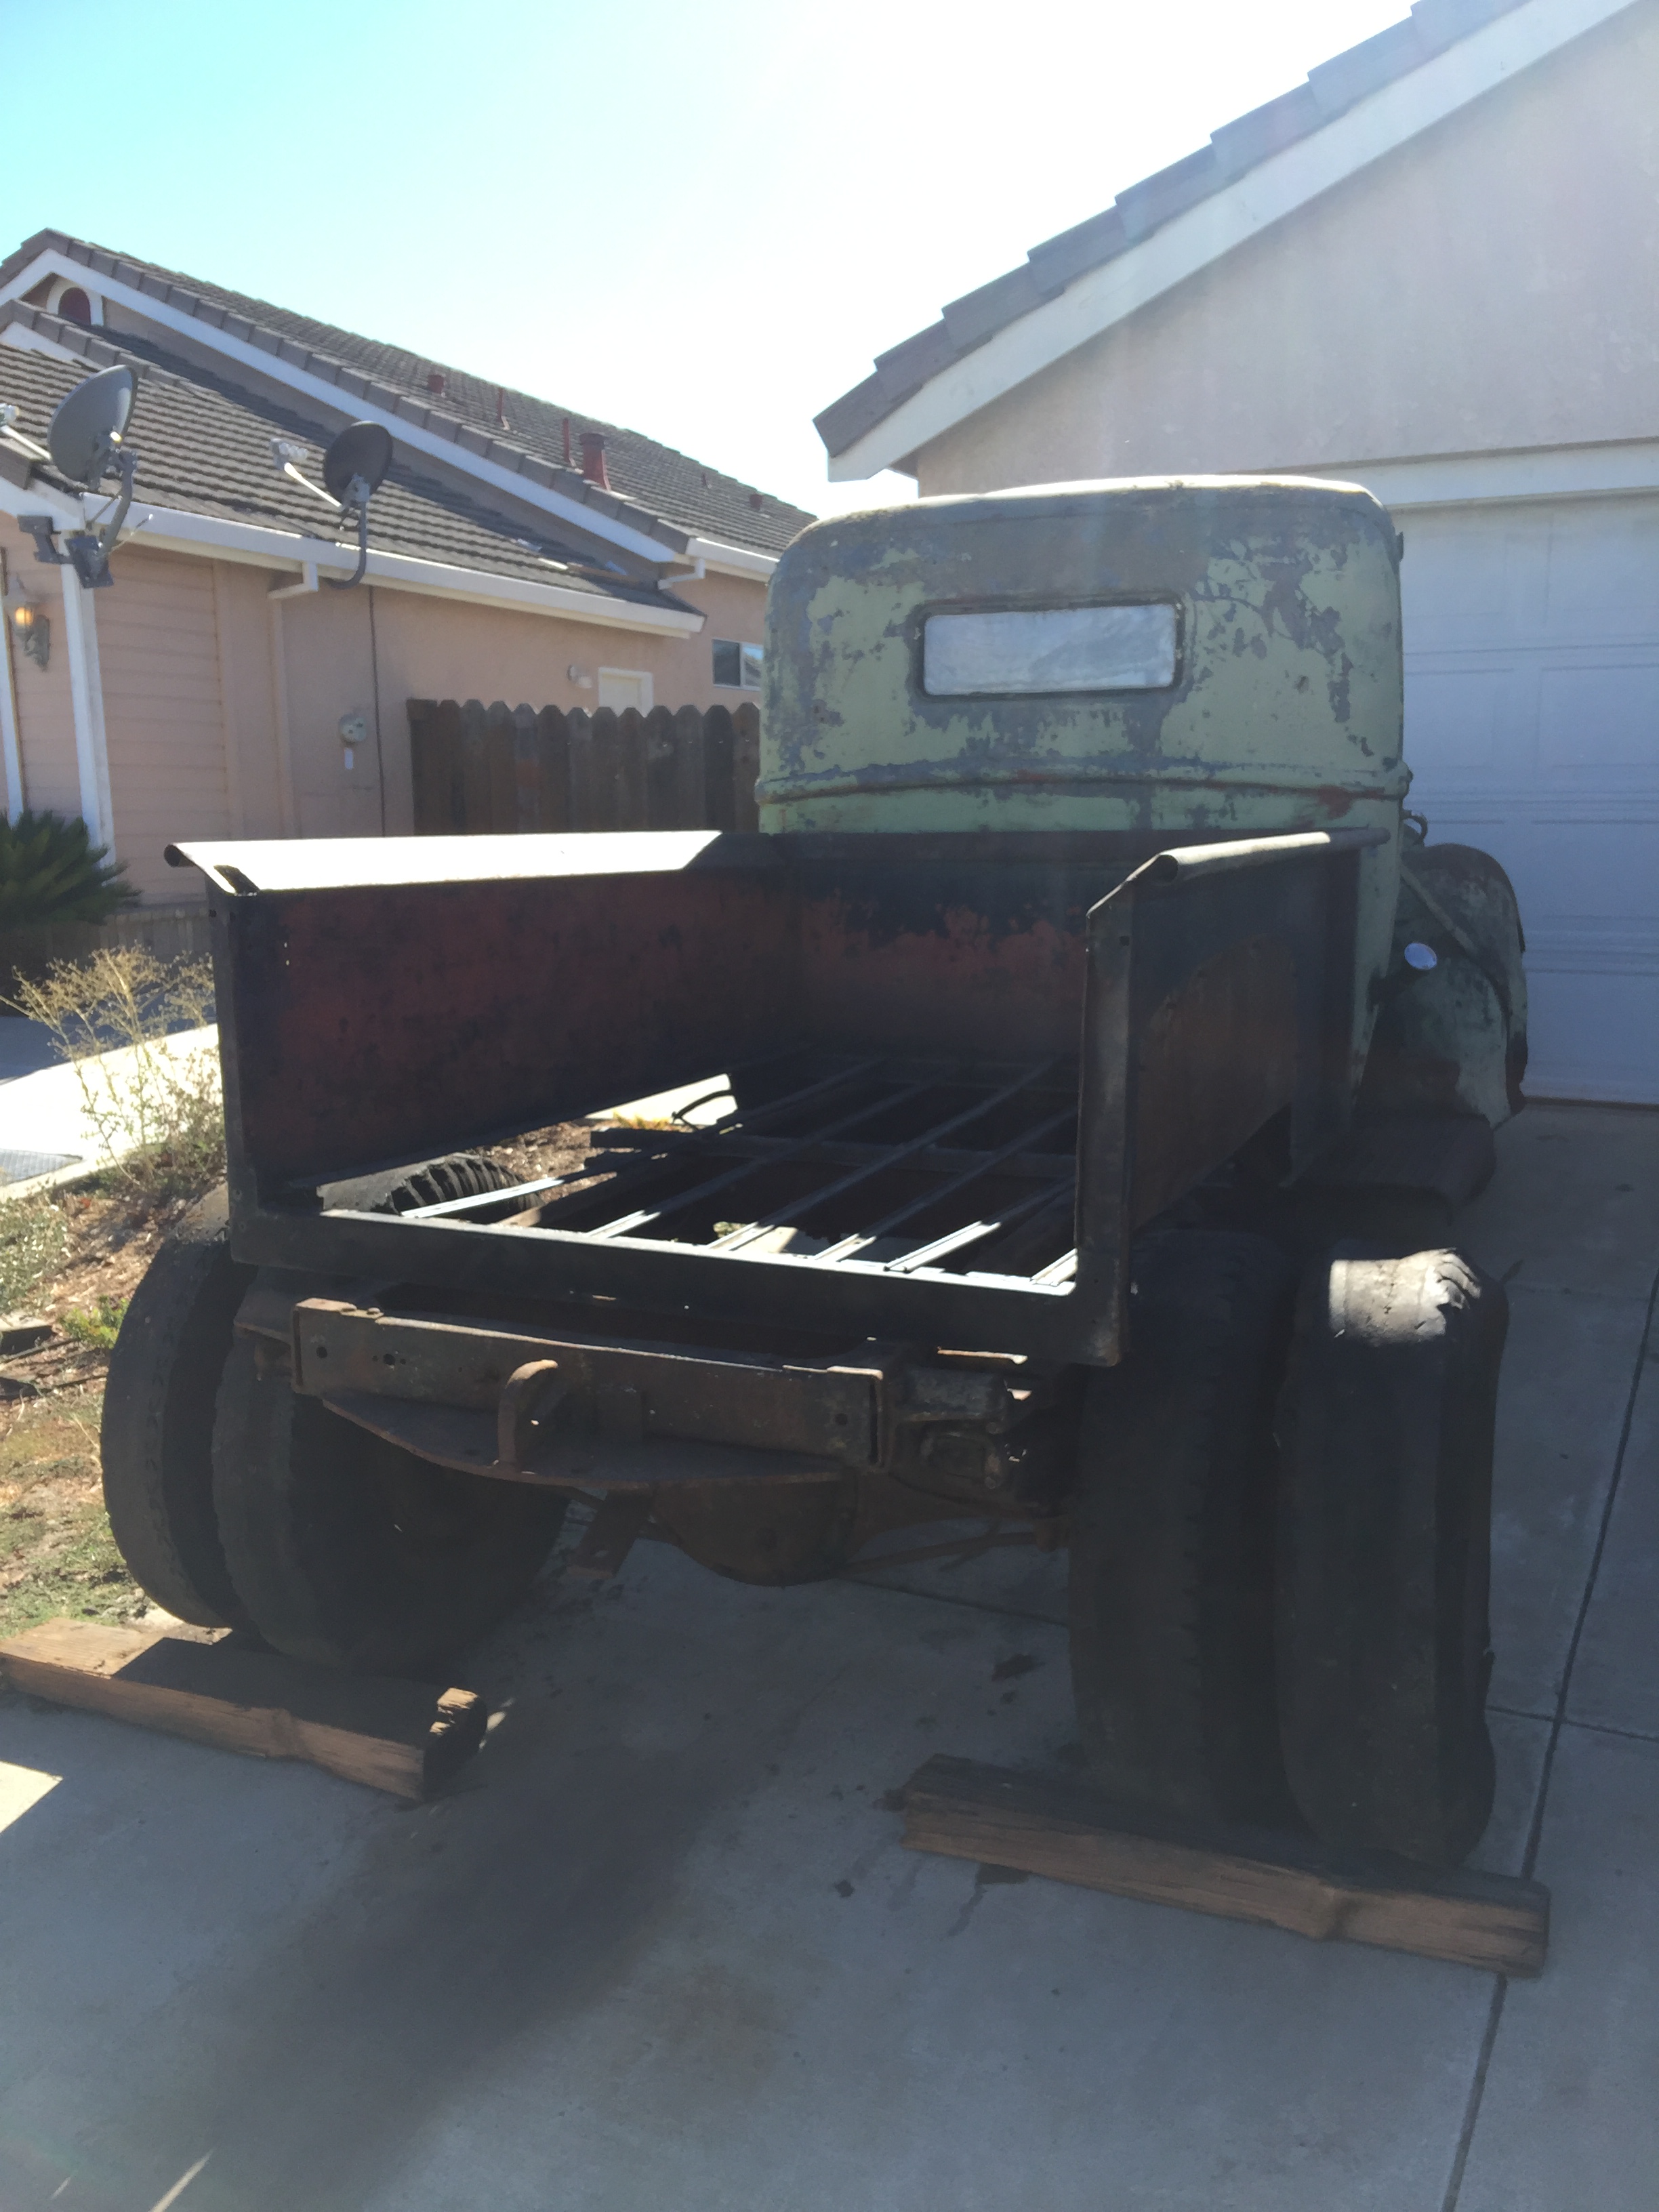 1941 ford truck - 41 ford truck - rear end shenanigans - mounting and locating a dana 60, rear fenders and more